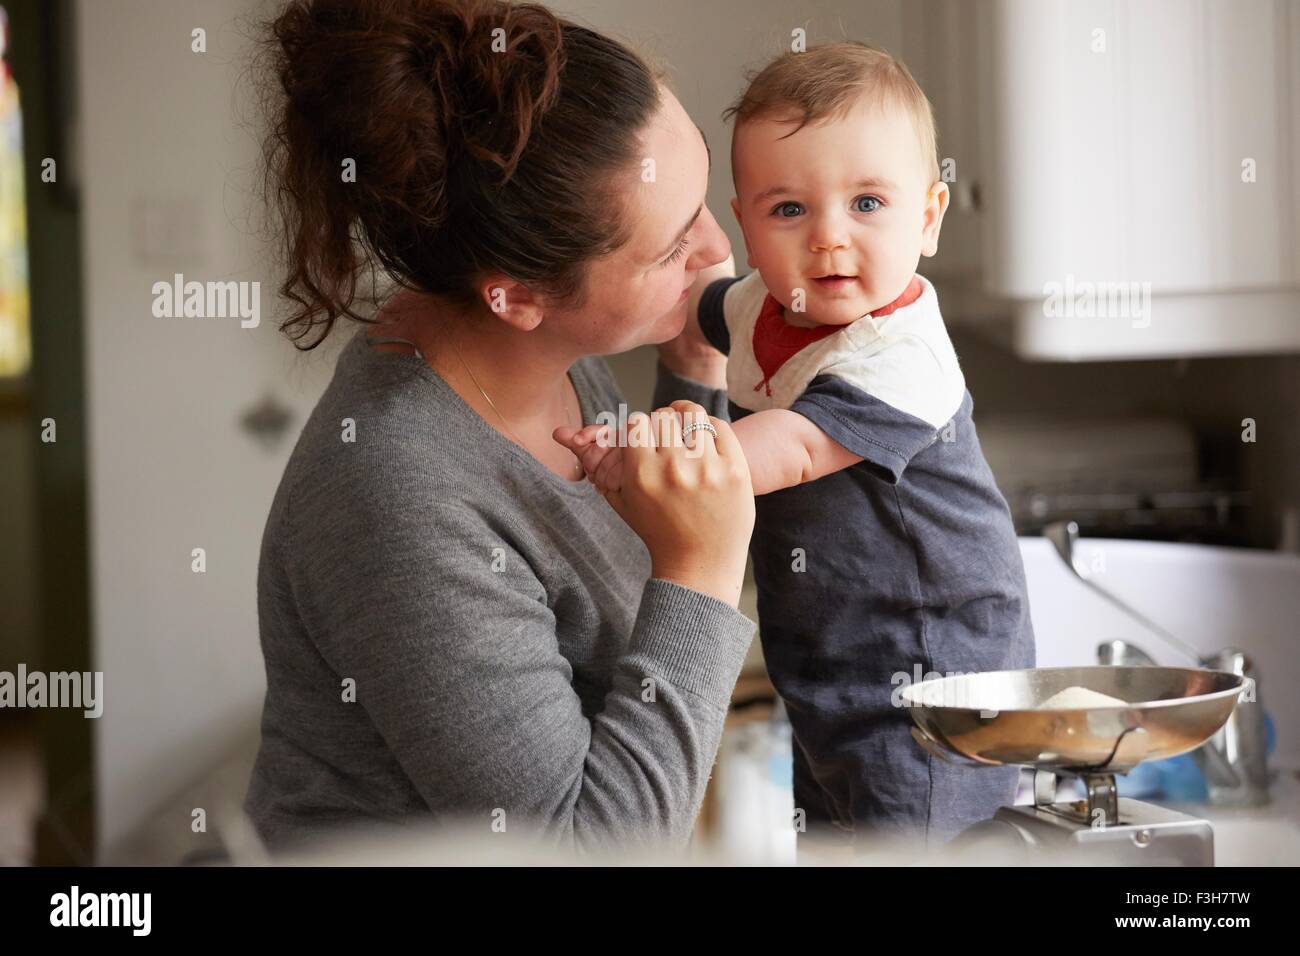 Mother holding baby boy on kitchen counter Stock Photo